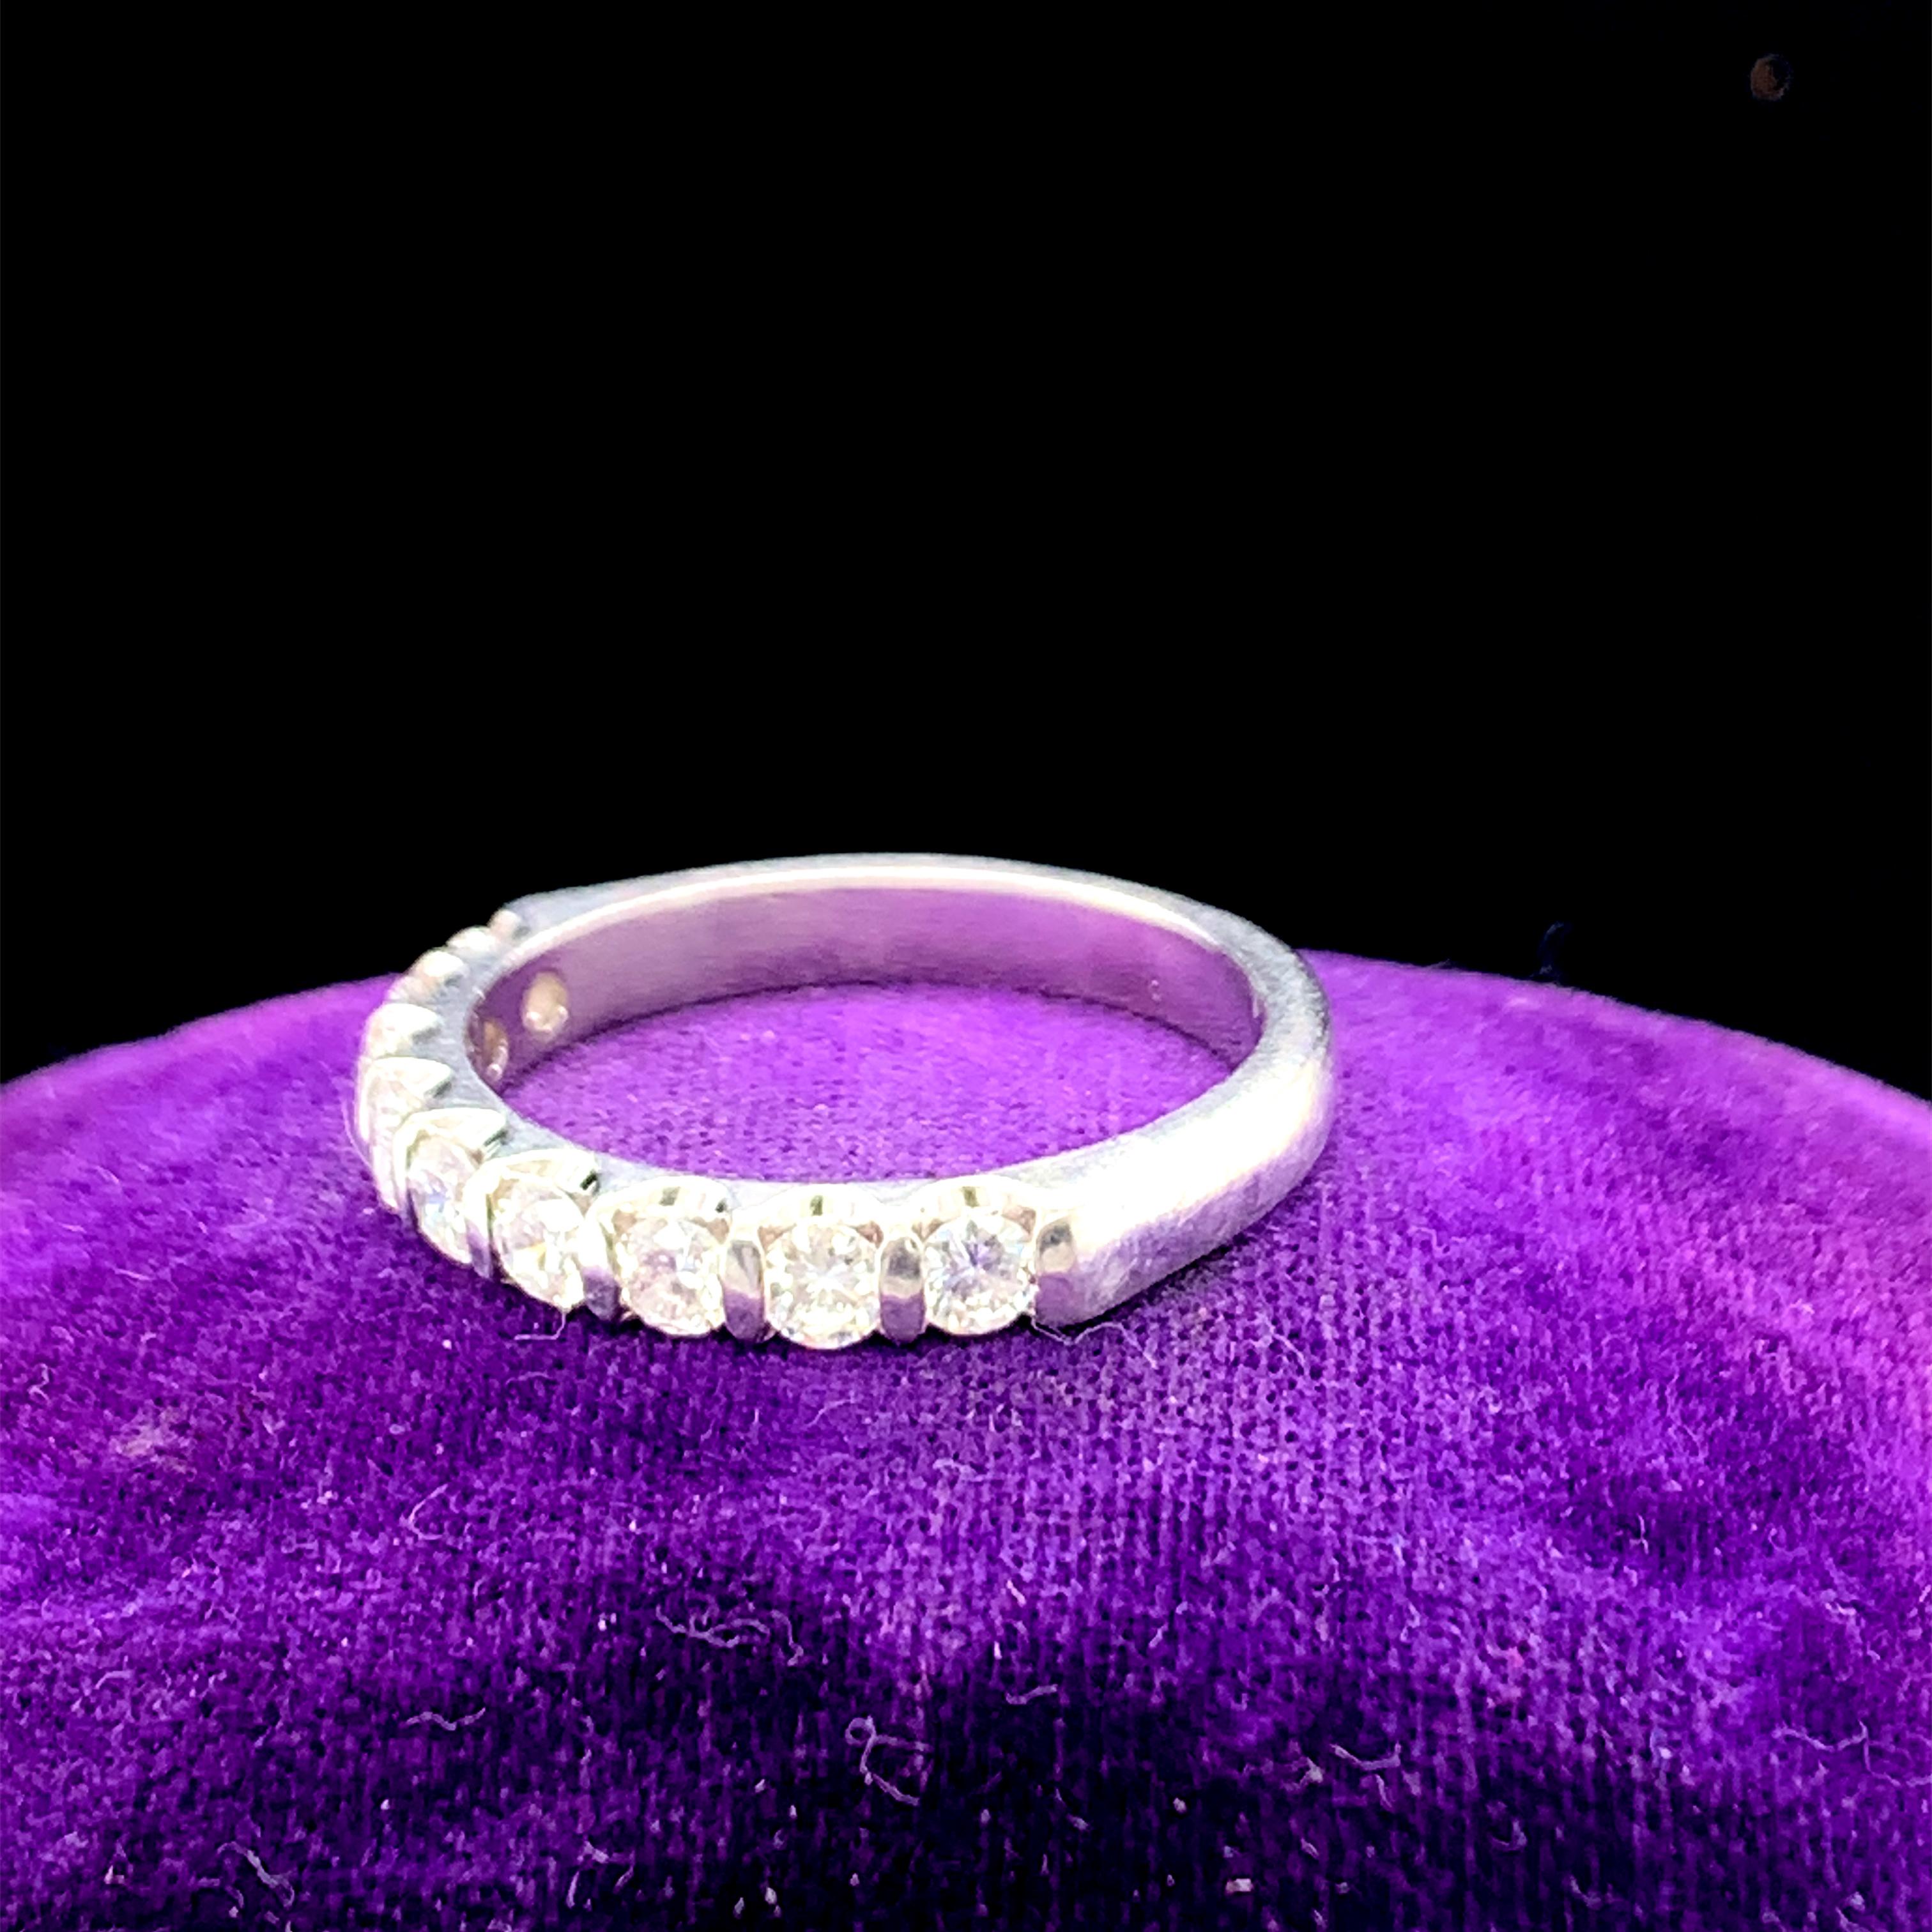 Year: 1960s

Item Details: 
Ring Size: 7.25
Metal Type: Platinum  [Hallmarked, and Tested]
Weight:  5.8 grams

Diamond Details:
Weight: 1.00ct, total weight
Cut: Round Brilliant
Color: F-G
Clarity: VS/SI

Finger to Top of Stone Measurement: